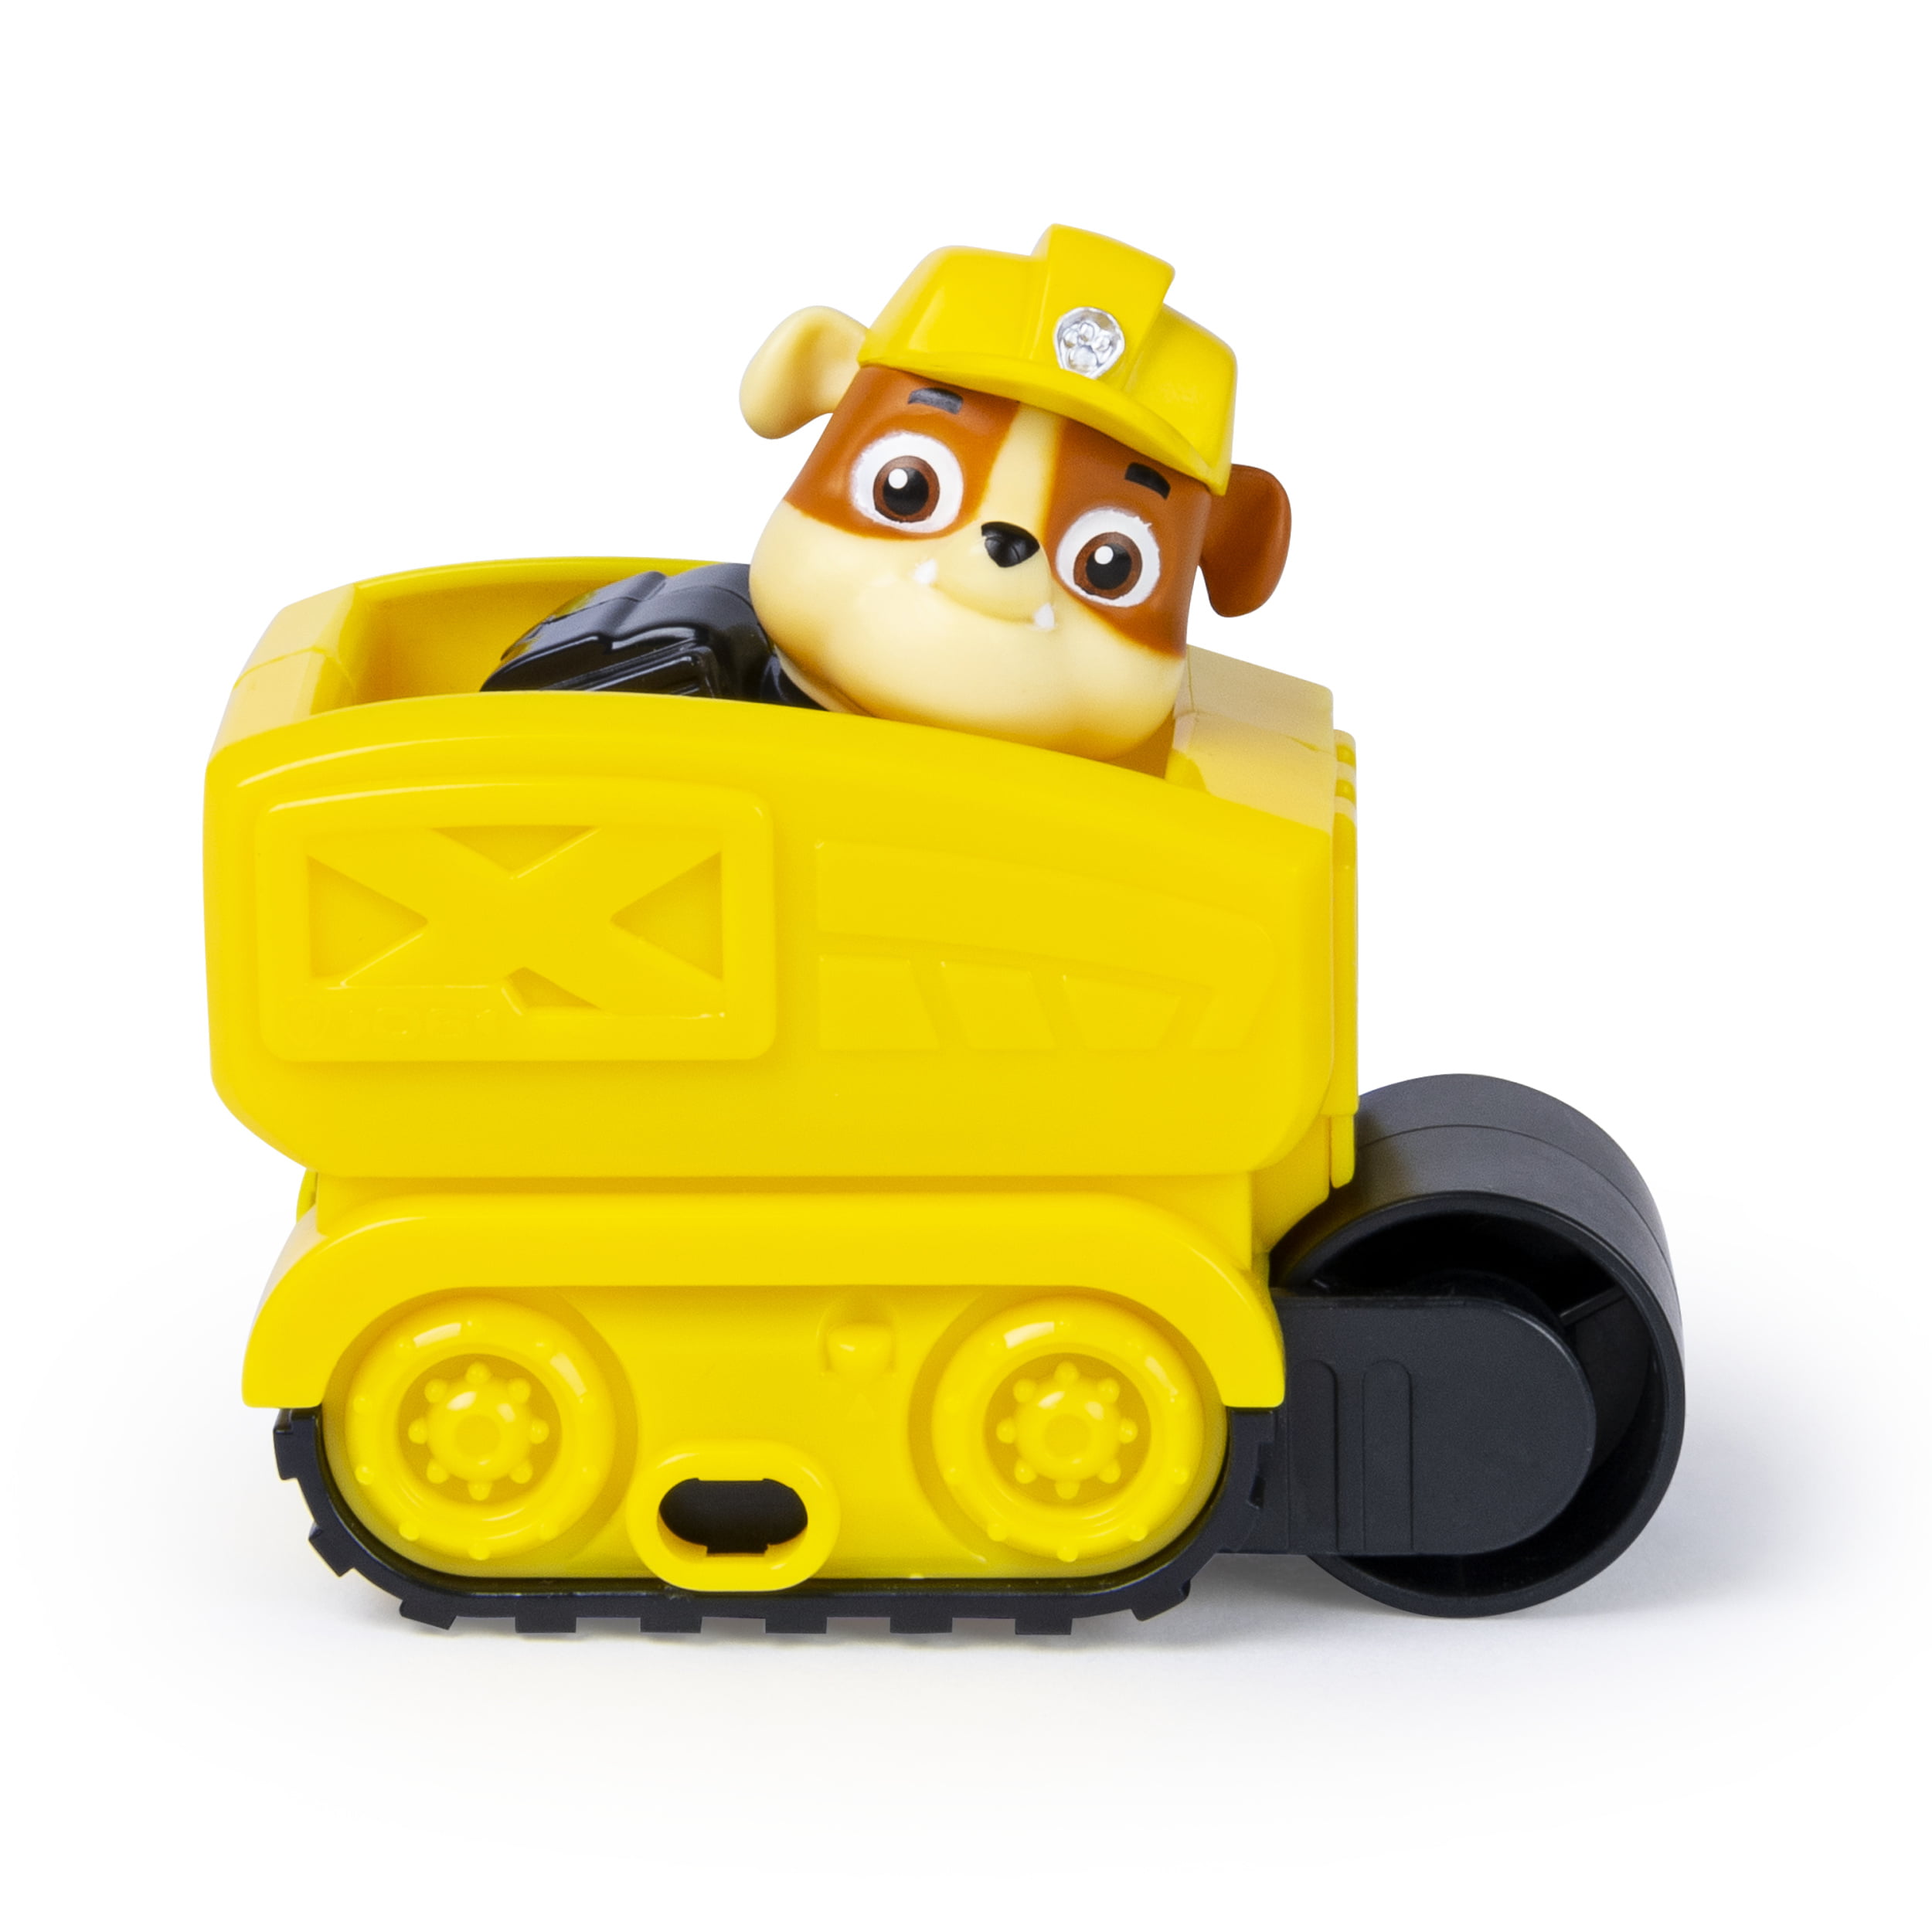 Spin Master 6046466 Paw Patrol Ultimate Construction 